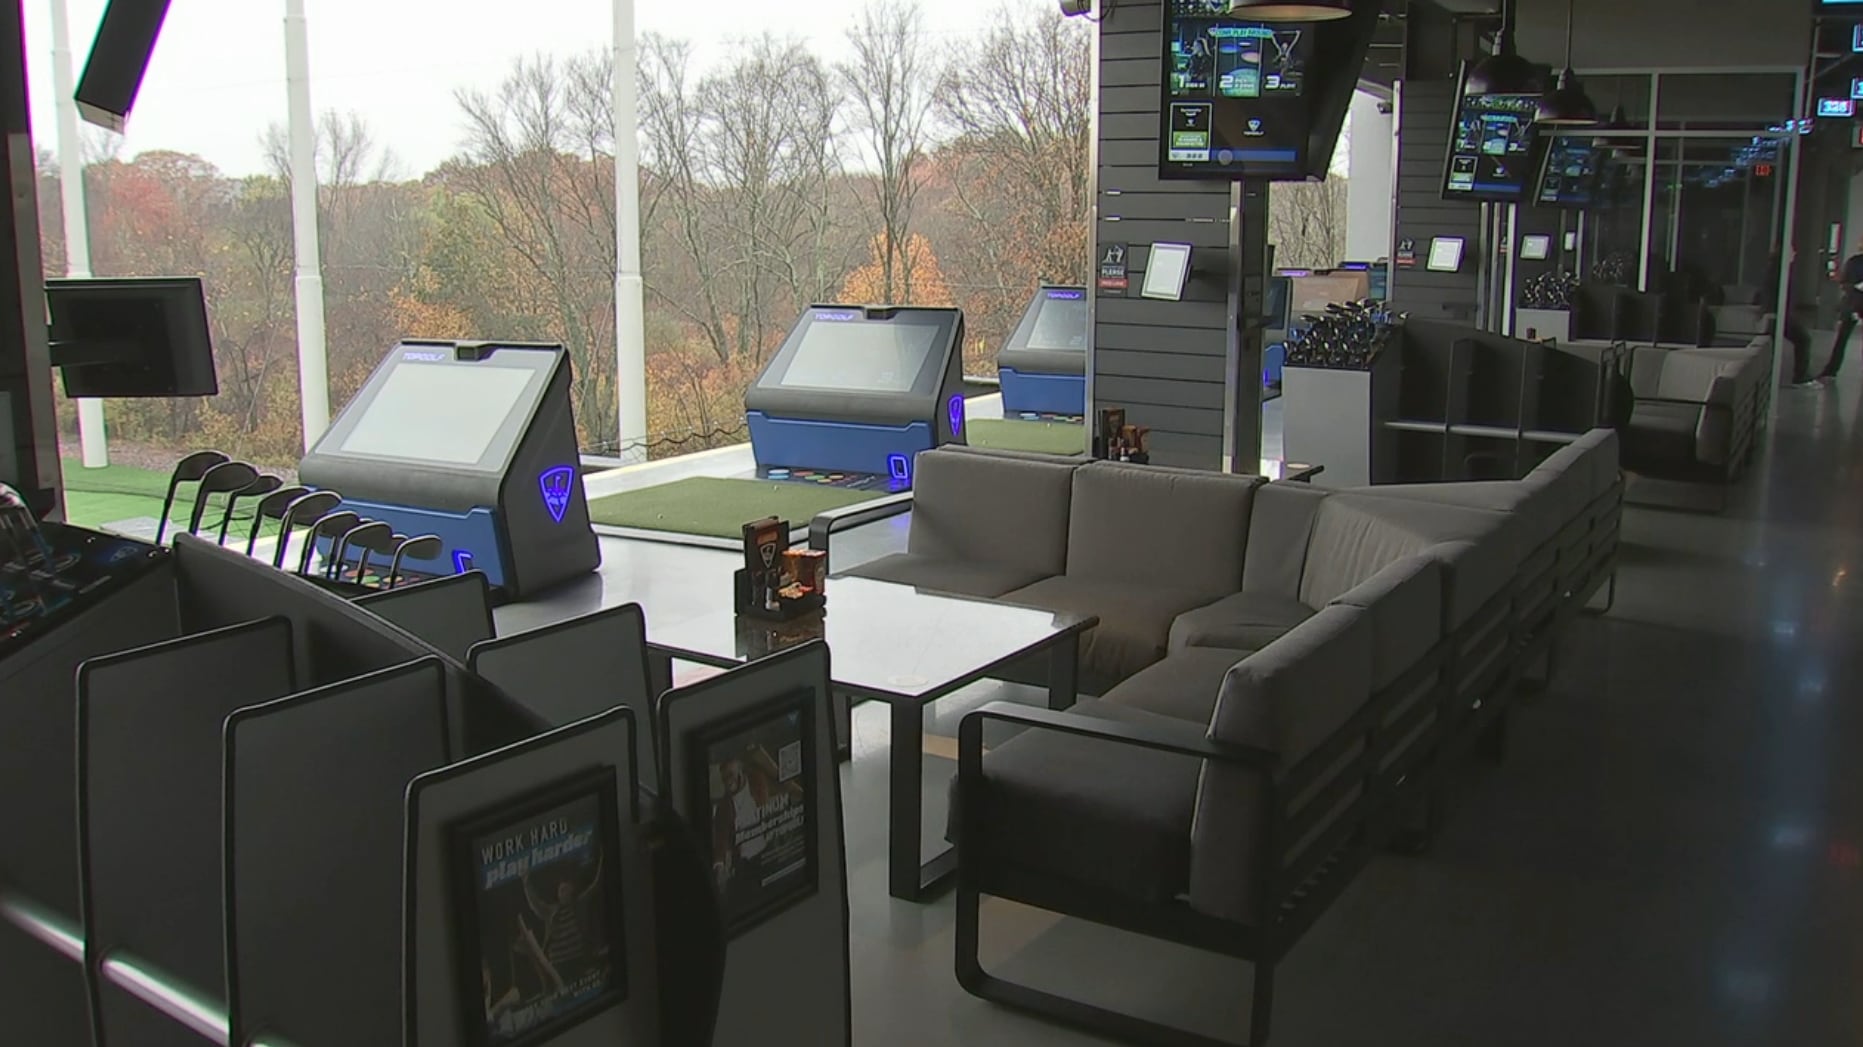 Topgolf announces opening date for its first Massachusetts location –  Boston 25 News